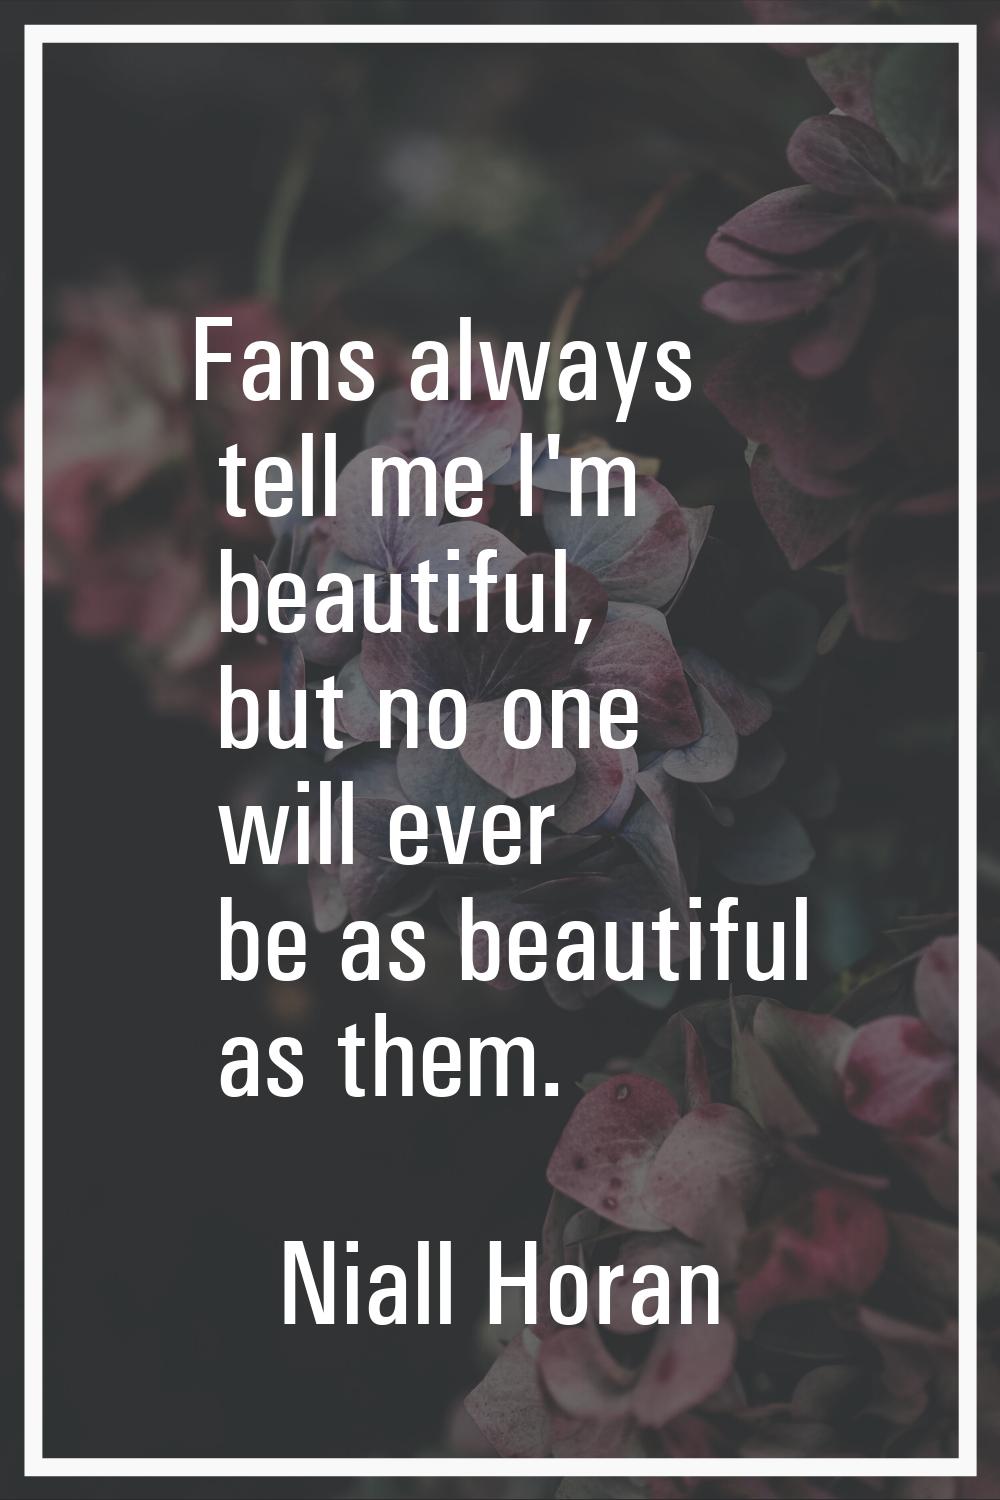 Fans always tell me I'm beautiful, but no one will ever be as beautiful as them.